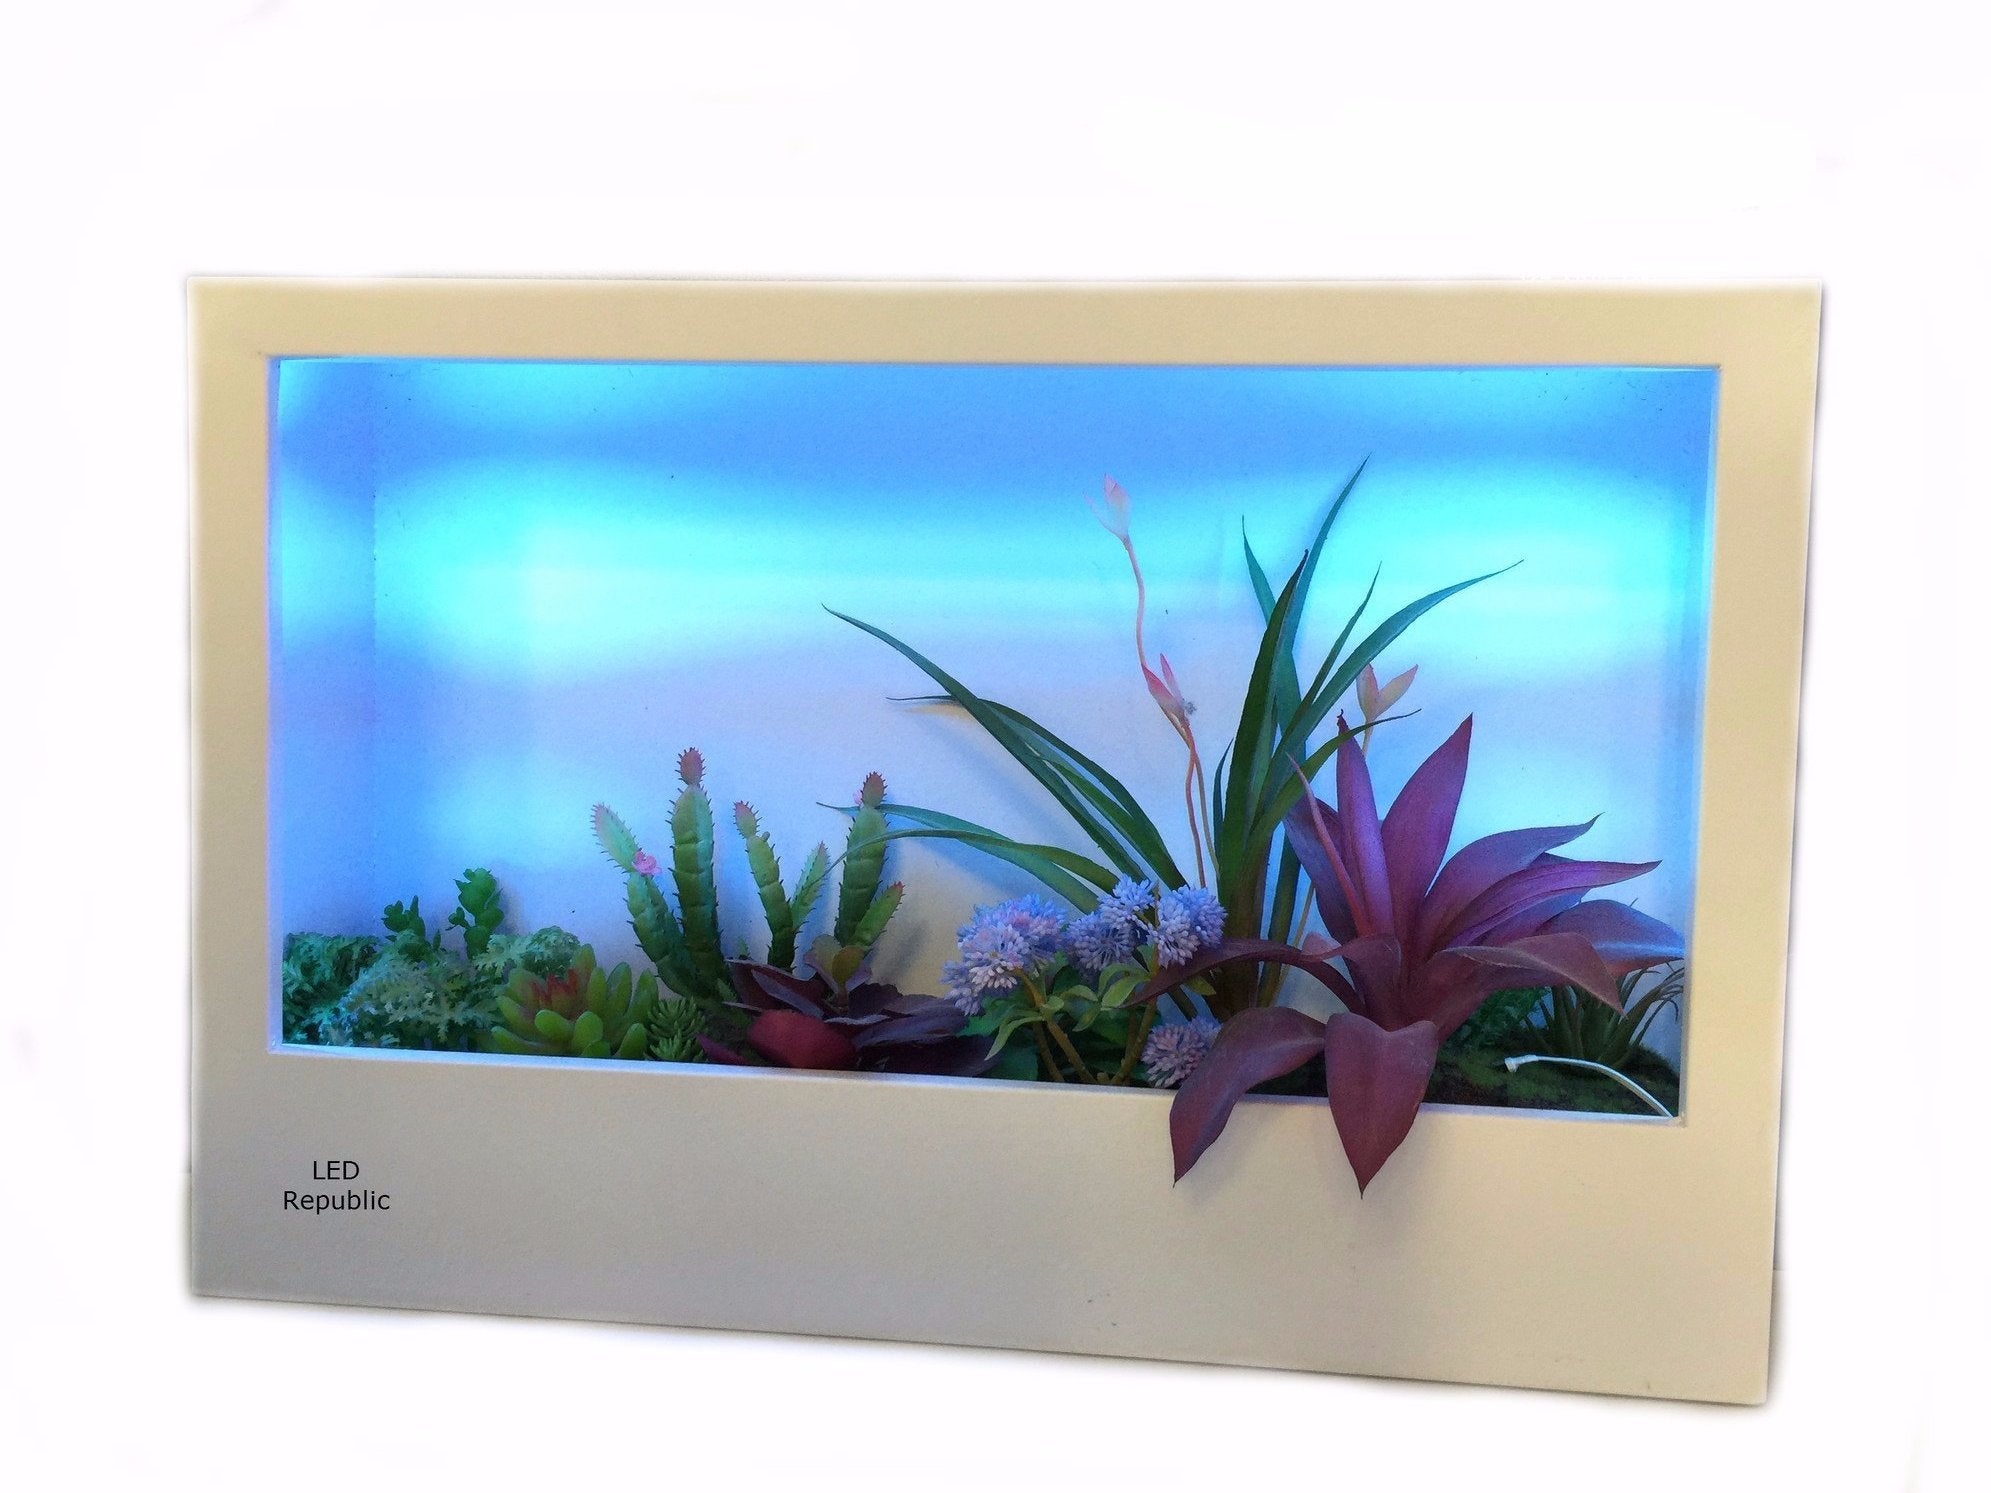 HISUN LED 24"in "Plant and Flower on the Wall" LED Change Color Light